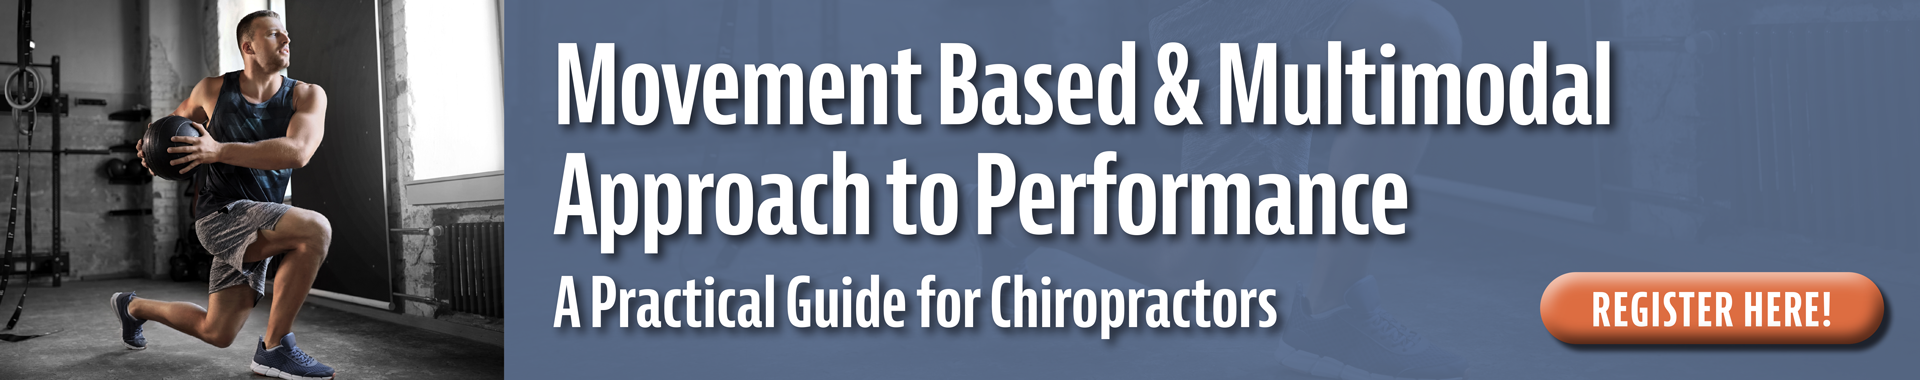 Movement Based & Multimodal Approach to Performance: A Practical Guide for Chiropractors